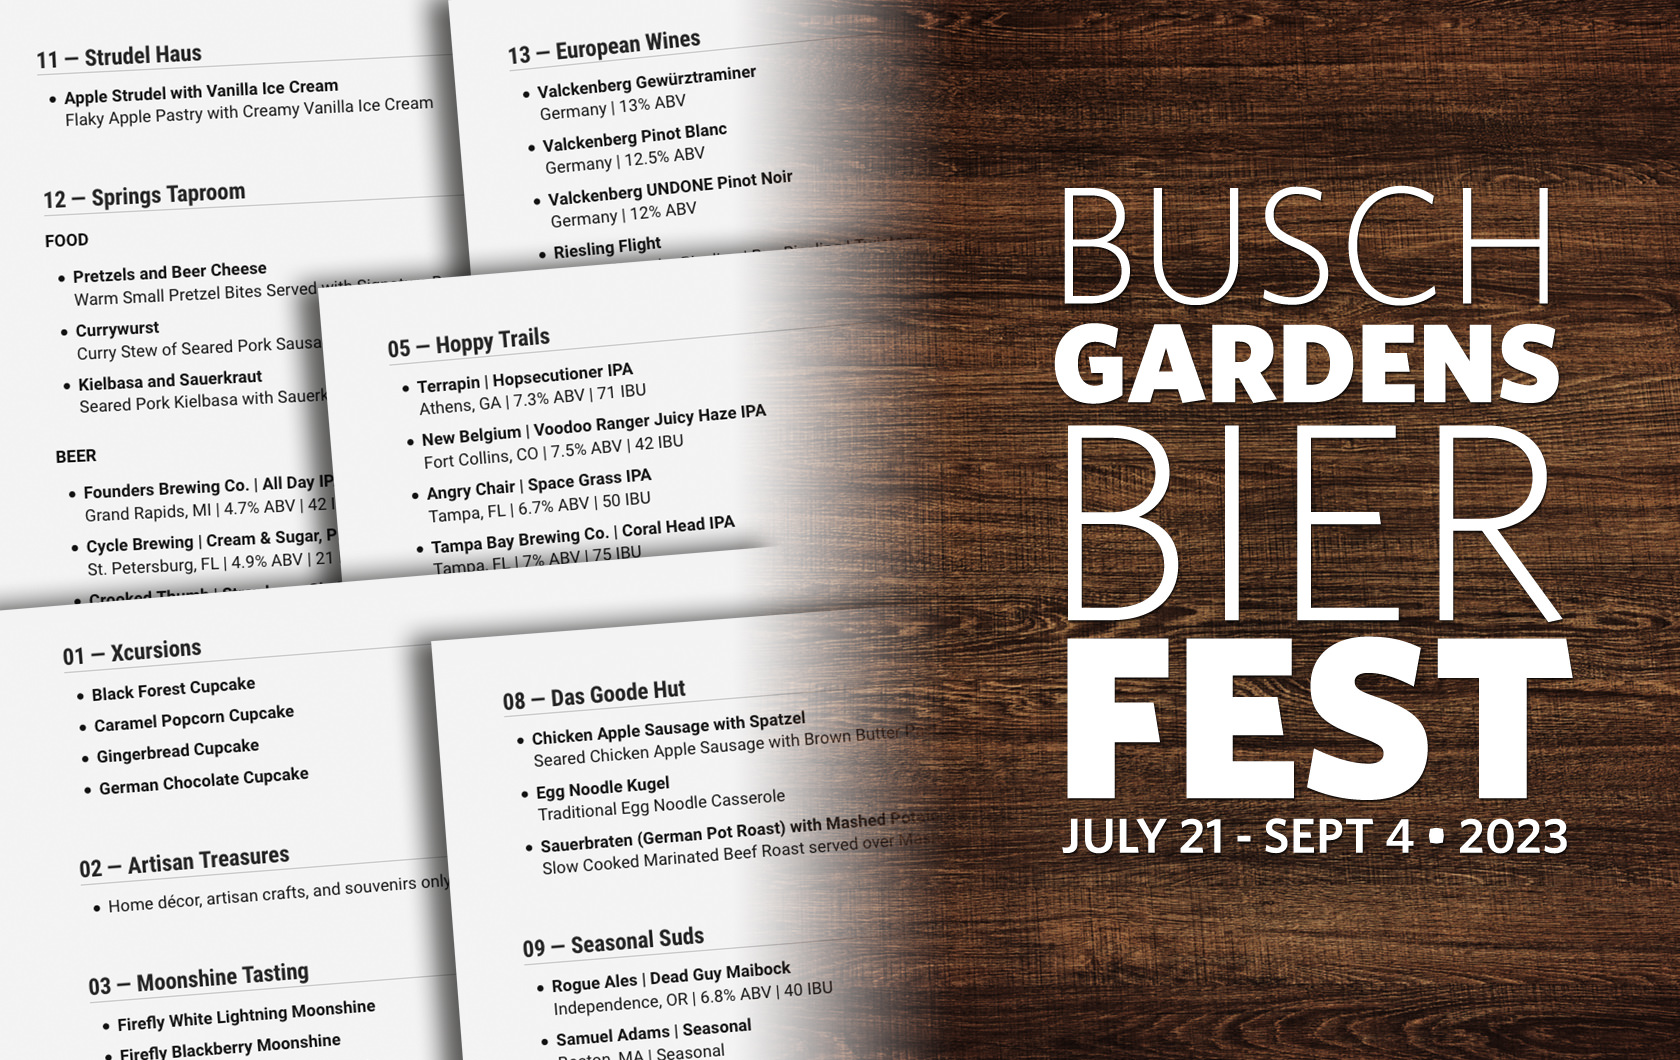 Food & Beer Menu Items for the 2023 Bier Fest at Busch Gardens, Tampa